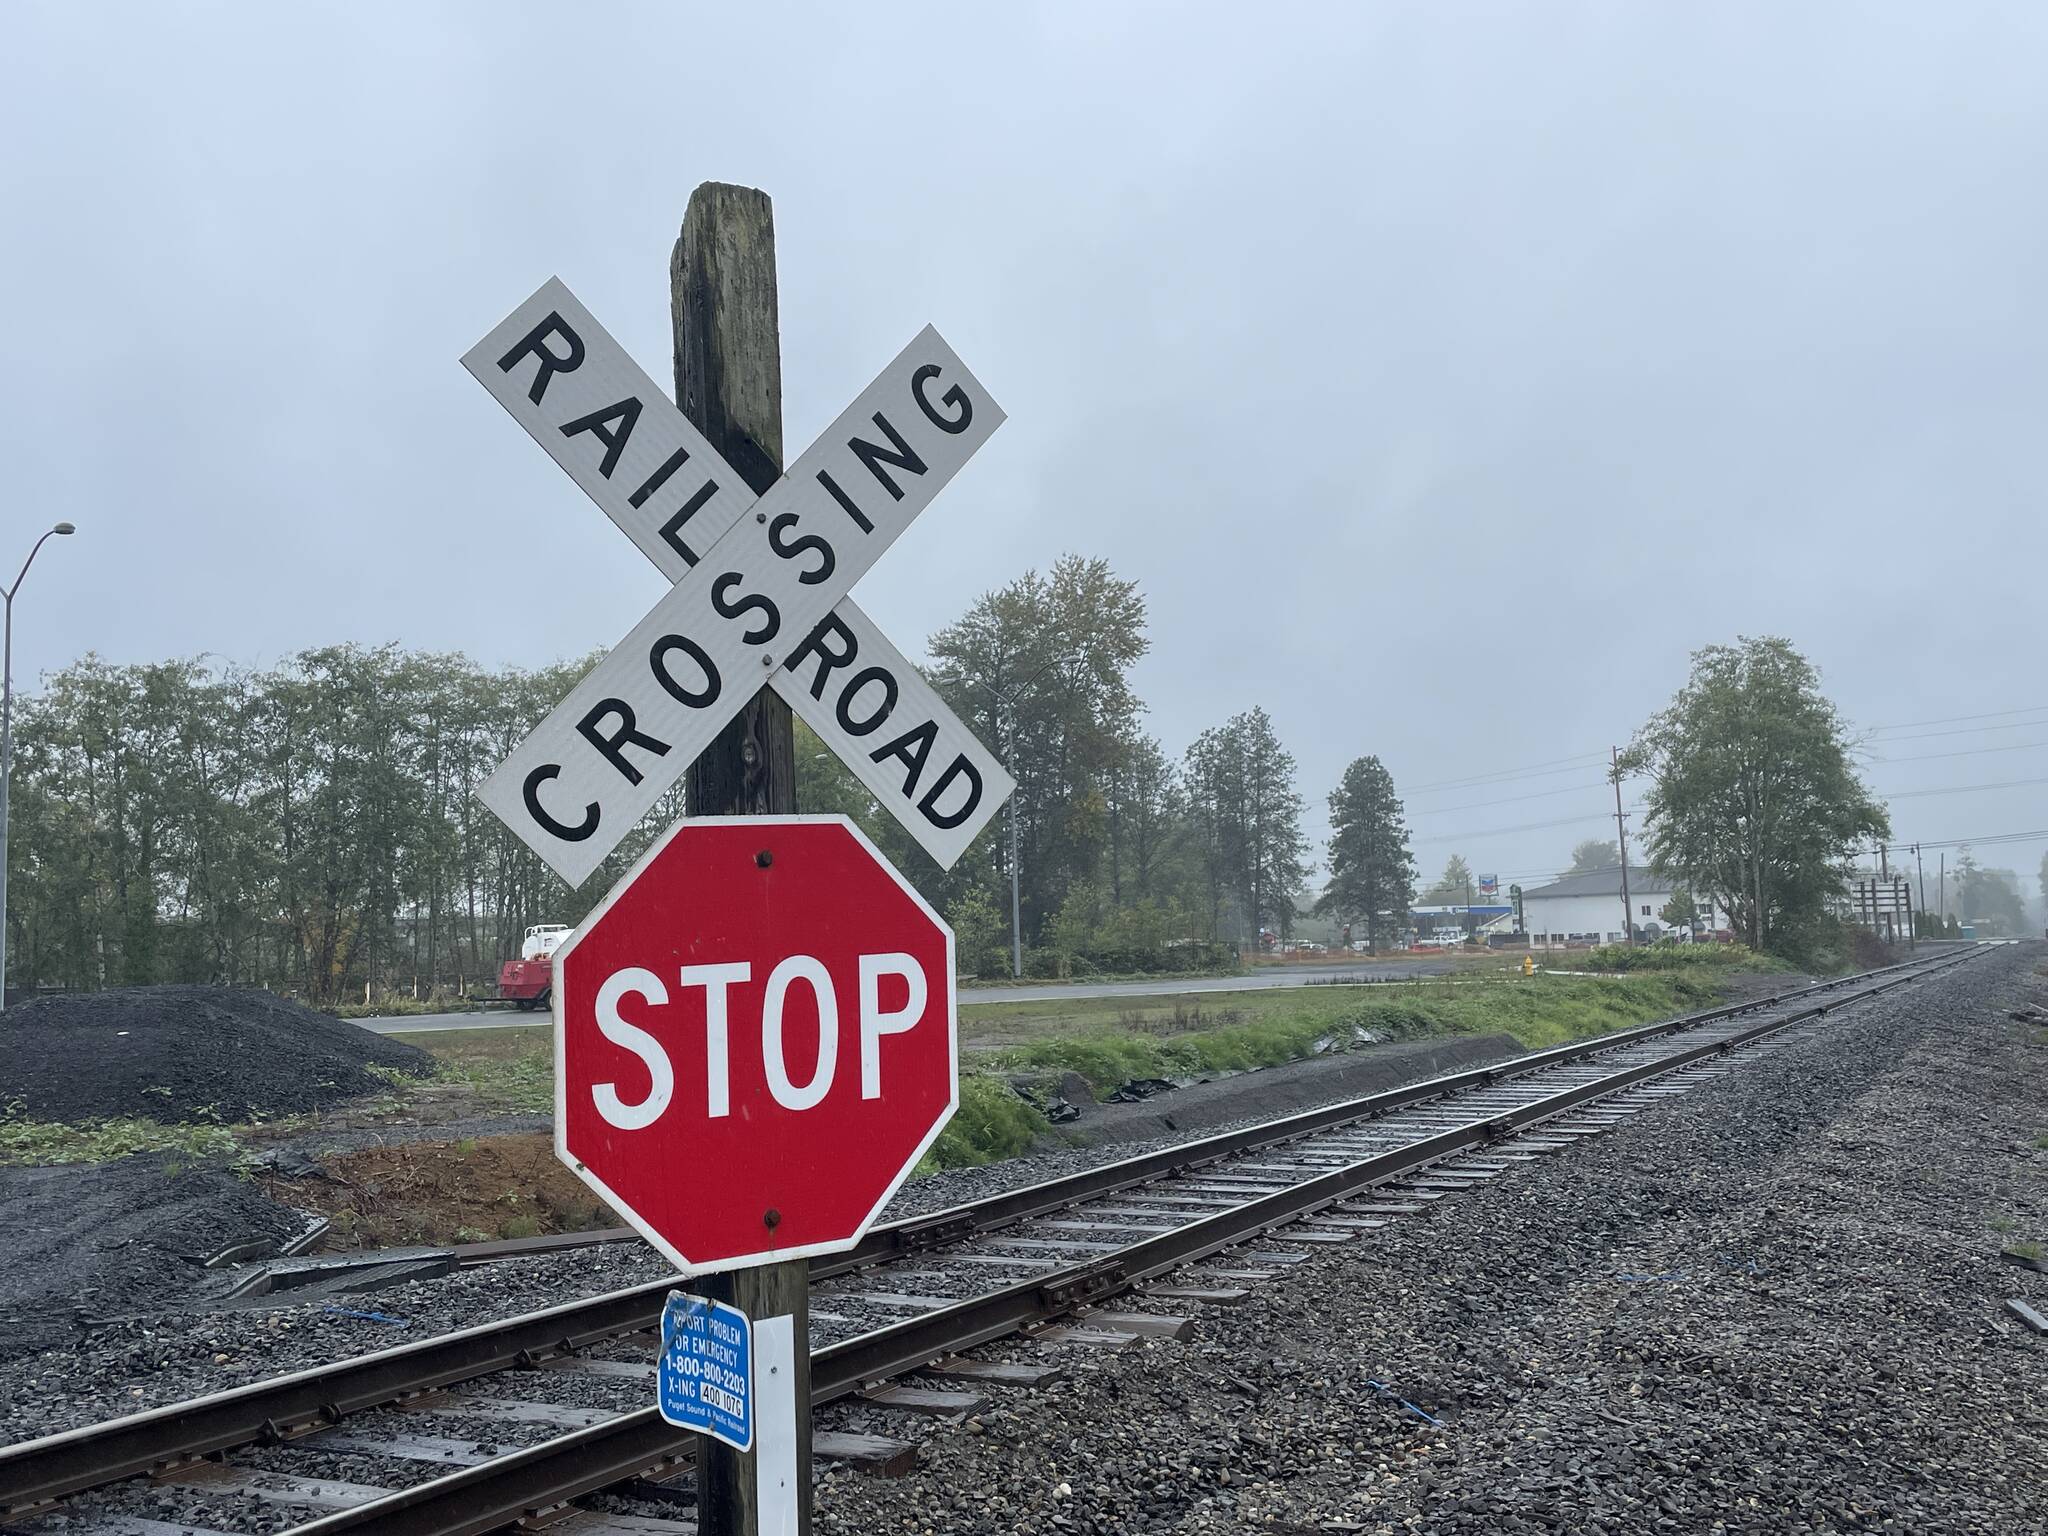 A Puget Sound & Pacific Railroad train struck an empty vehicle on the tracks near Montesano early Monday morning. (Michael S. Lockett / The Daily World)